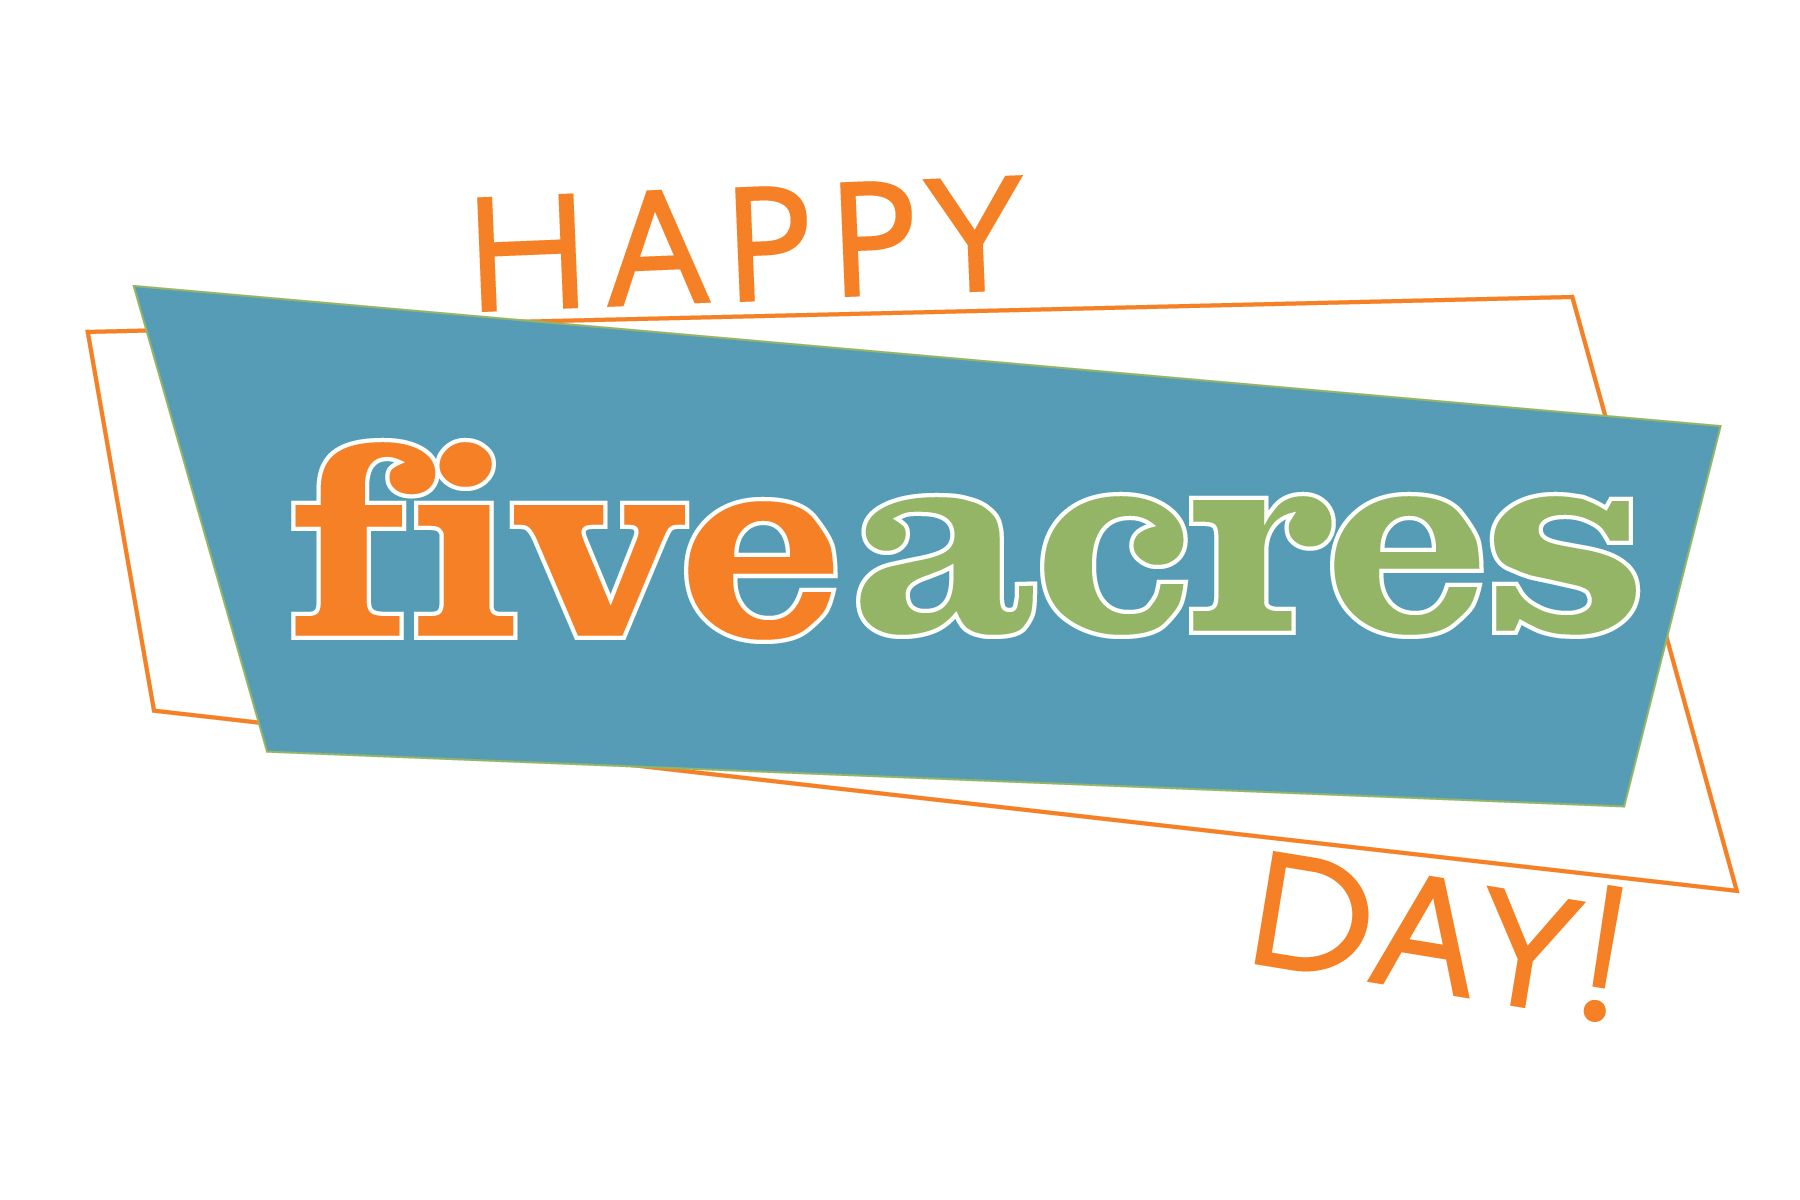 Five Acres celebrates its 133rd birthday on March 12